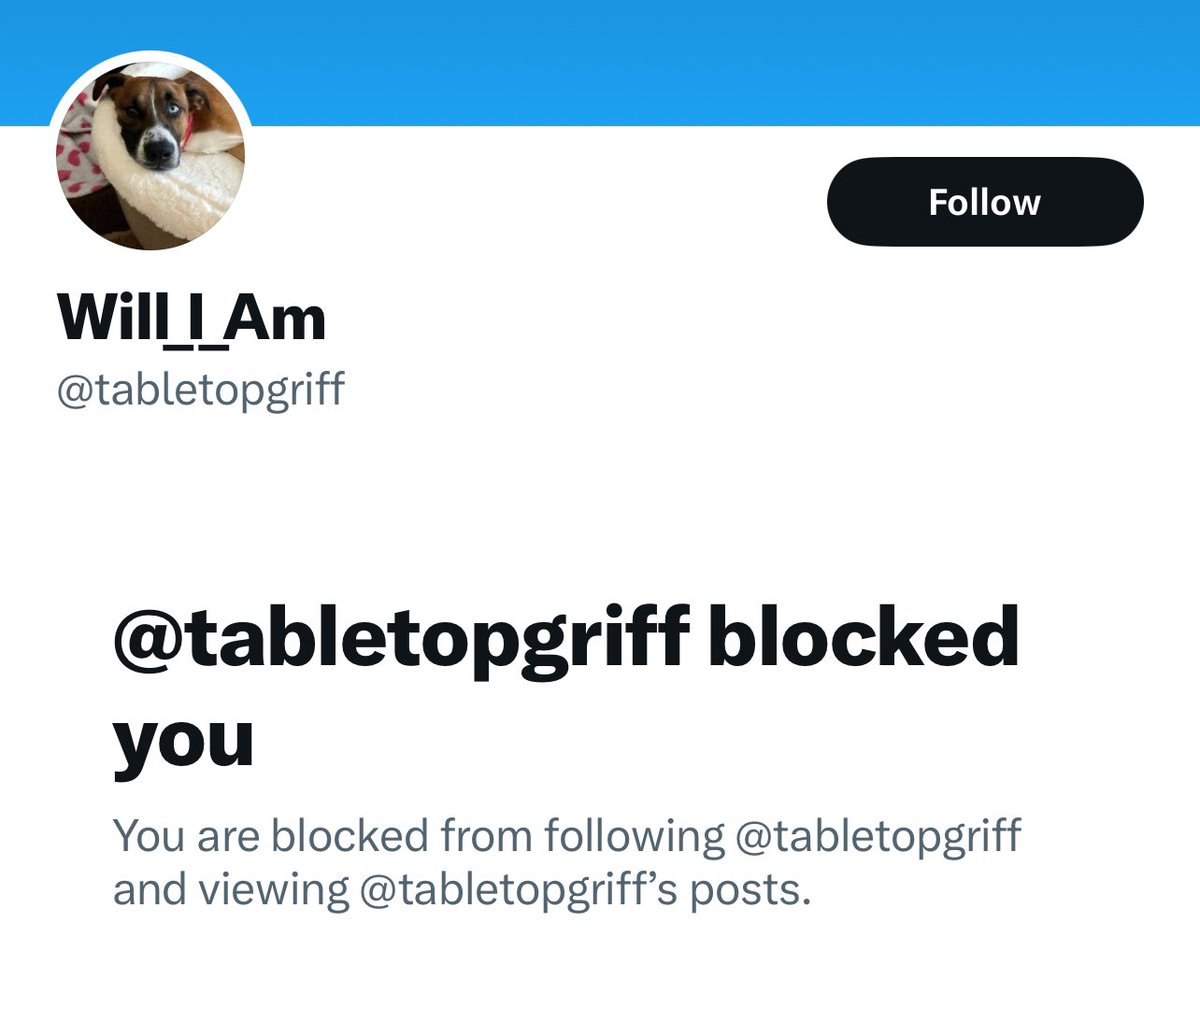 The ape memestock loser @tabletopgriff challenged me to a net worth contest and I told him my info’s been pinned to my feed for months. He starts making excuses and wanting me to “bet” whose net worth is higher.

I just told him to post his and stop delaying.

Then he blocked me…